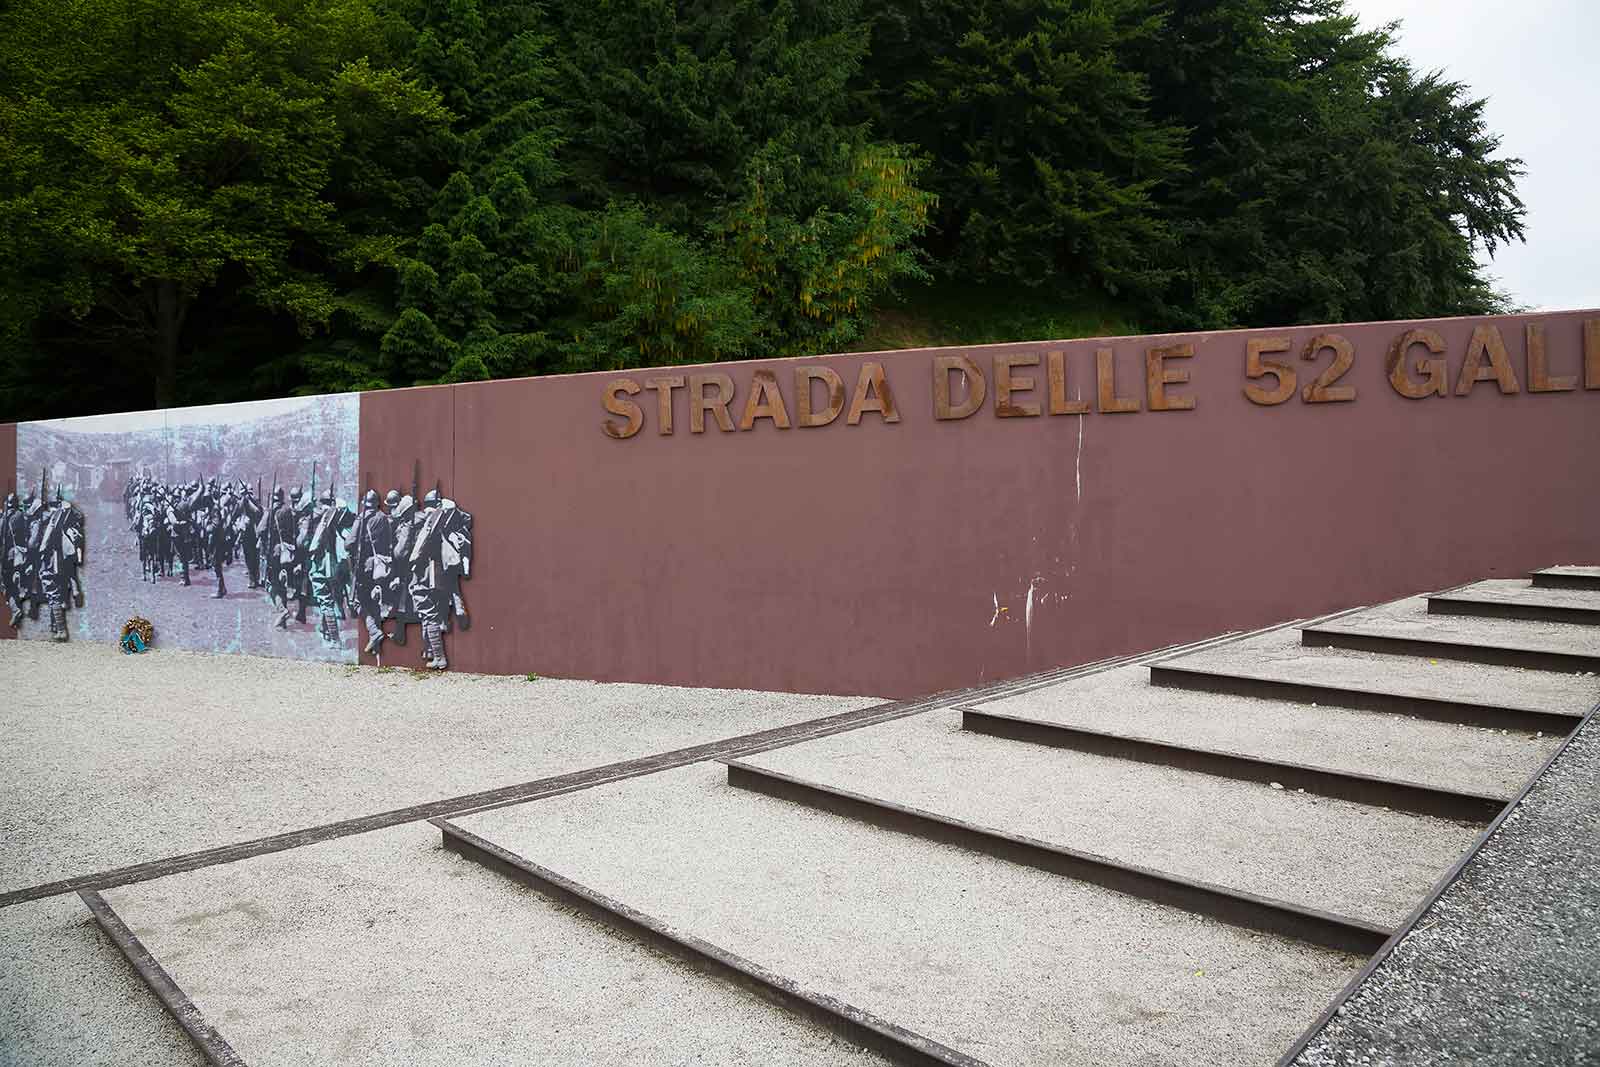 Hiking through the Strada delle 52 Gallerie is a walk through history.